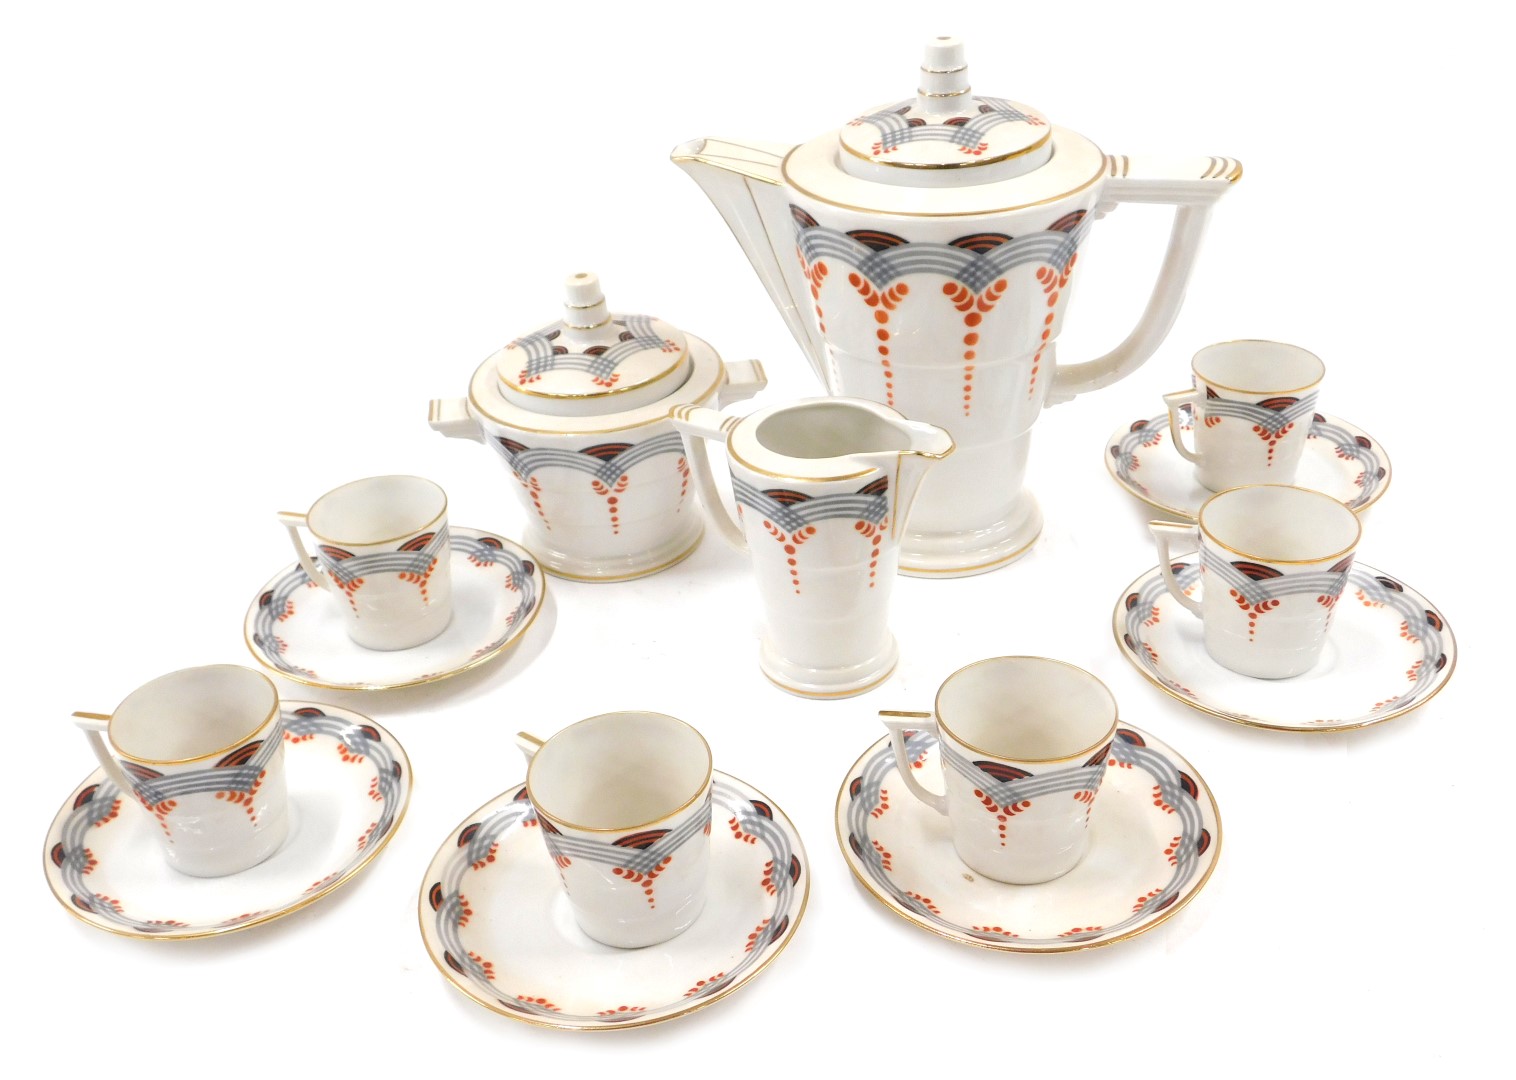 A Limoges Legrand & Co Art Deco coffee service, each piece decorated with arches in grey, black and